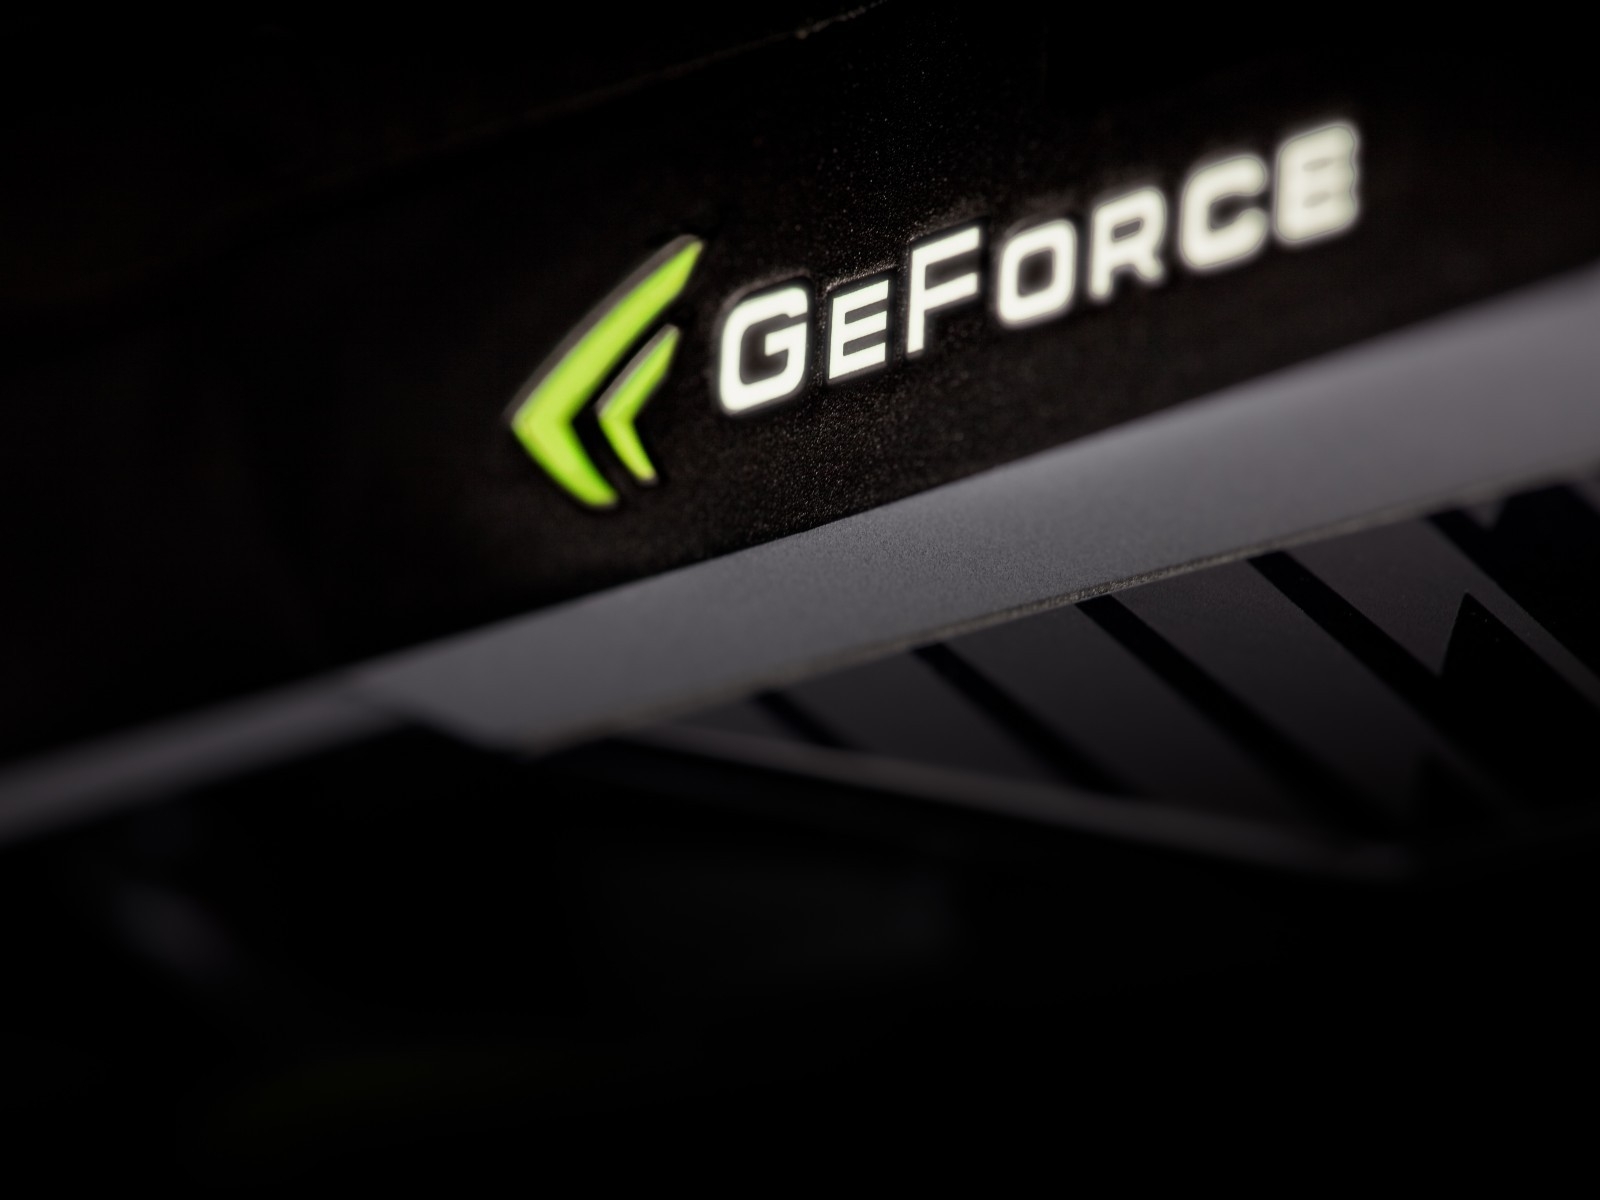 GeForce Graphics for 1600 x 1200 resolution